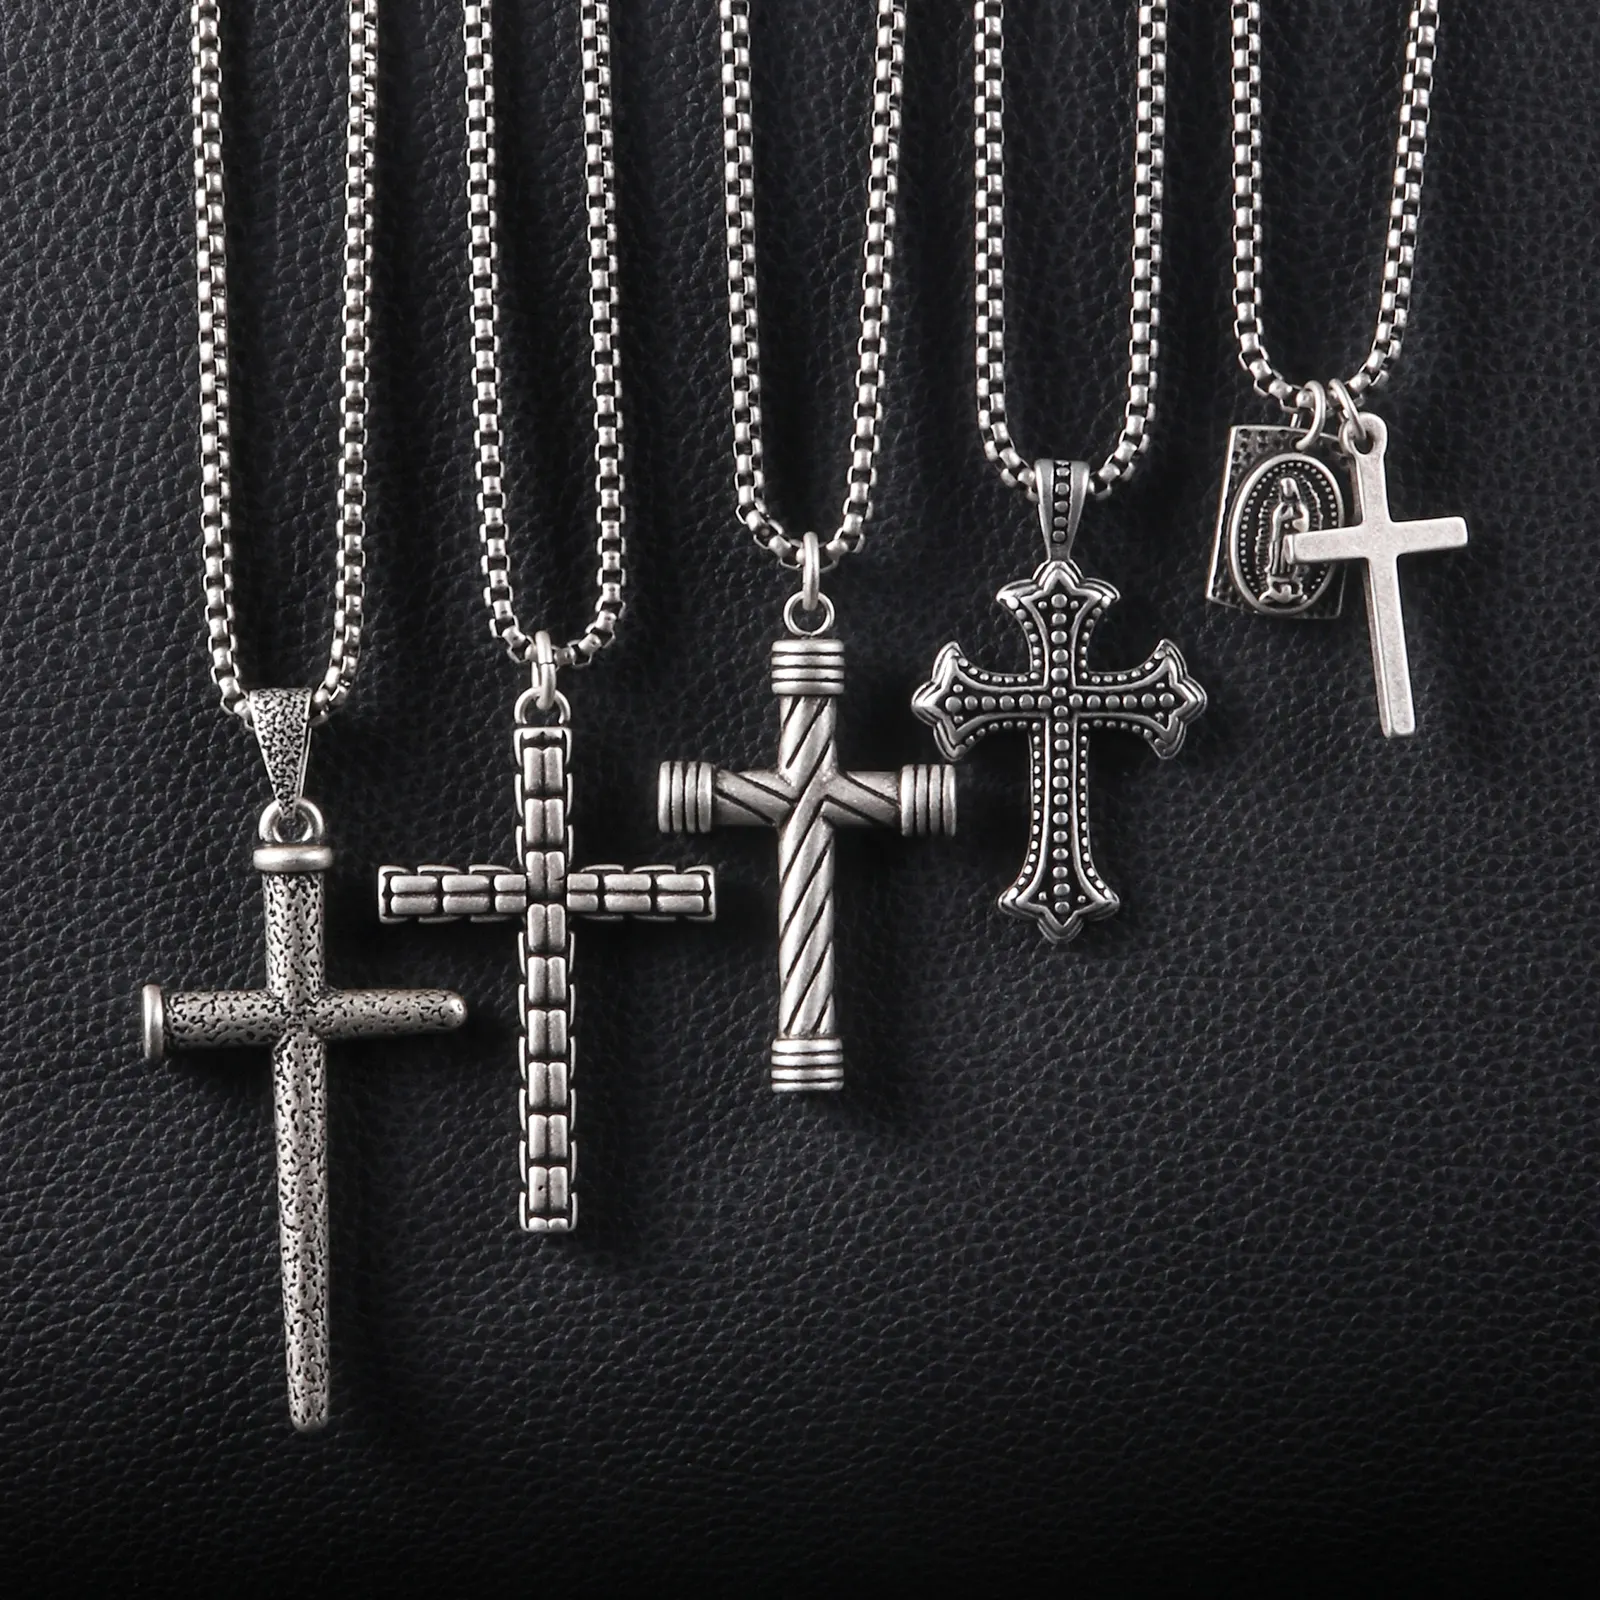 Antique Jewelry Silver Baguette High Quality Vintage Christian Religious Stainless Steel Cross Charm Pendant Necklace For Men